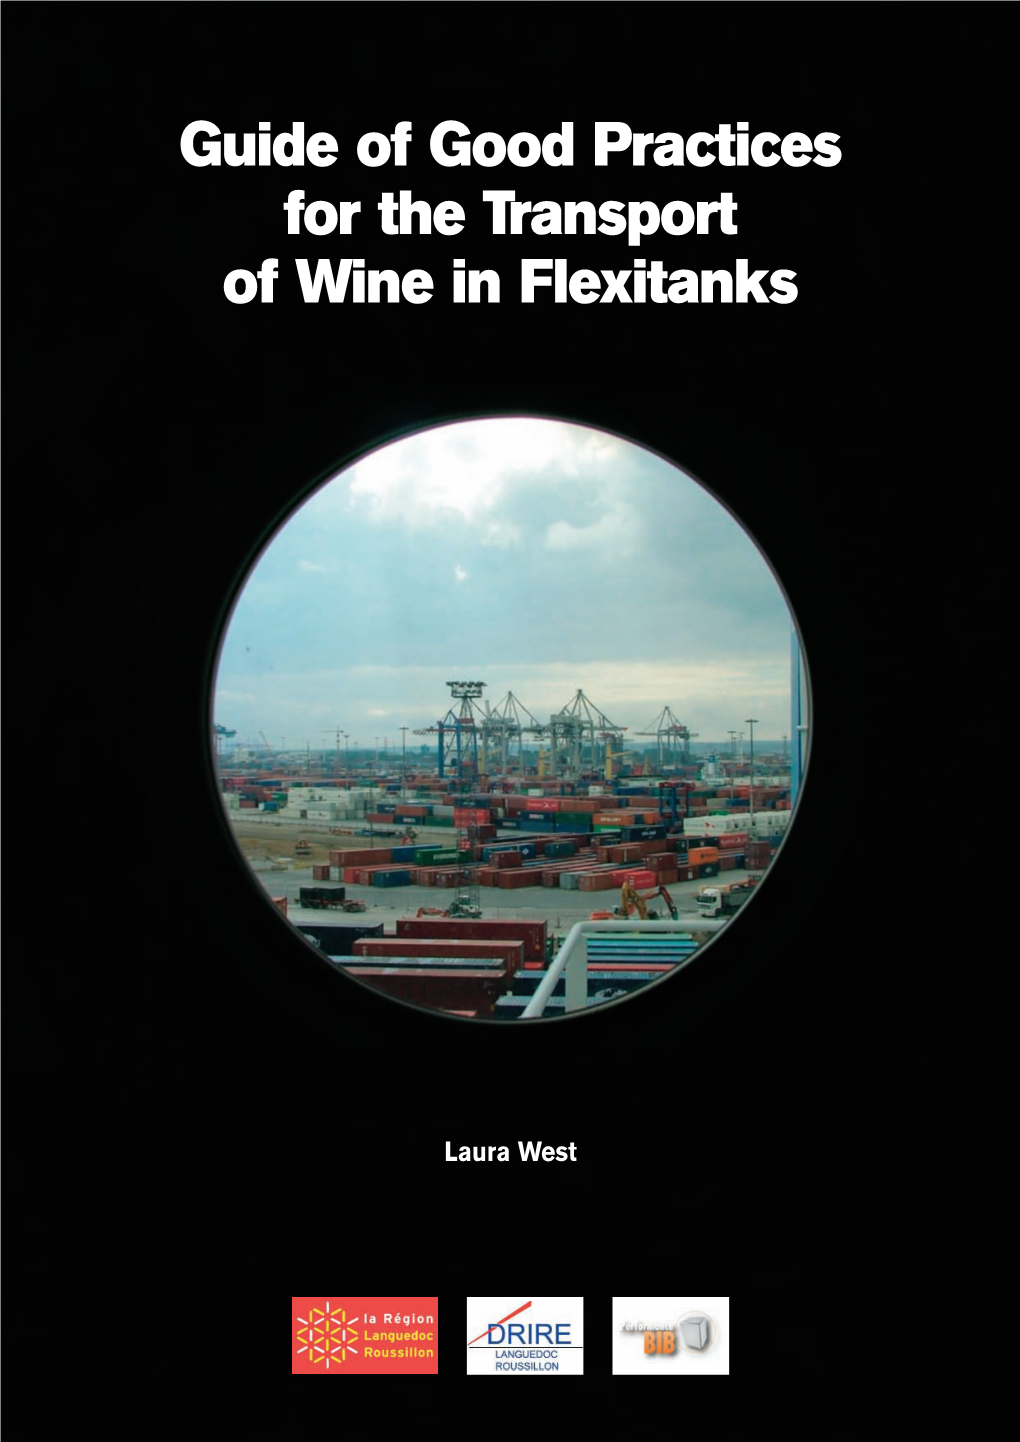 Guide of Good Practices for the Transport of Wine in Flexitanks